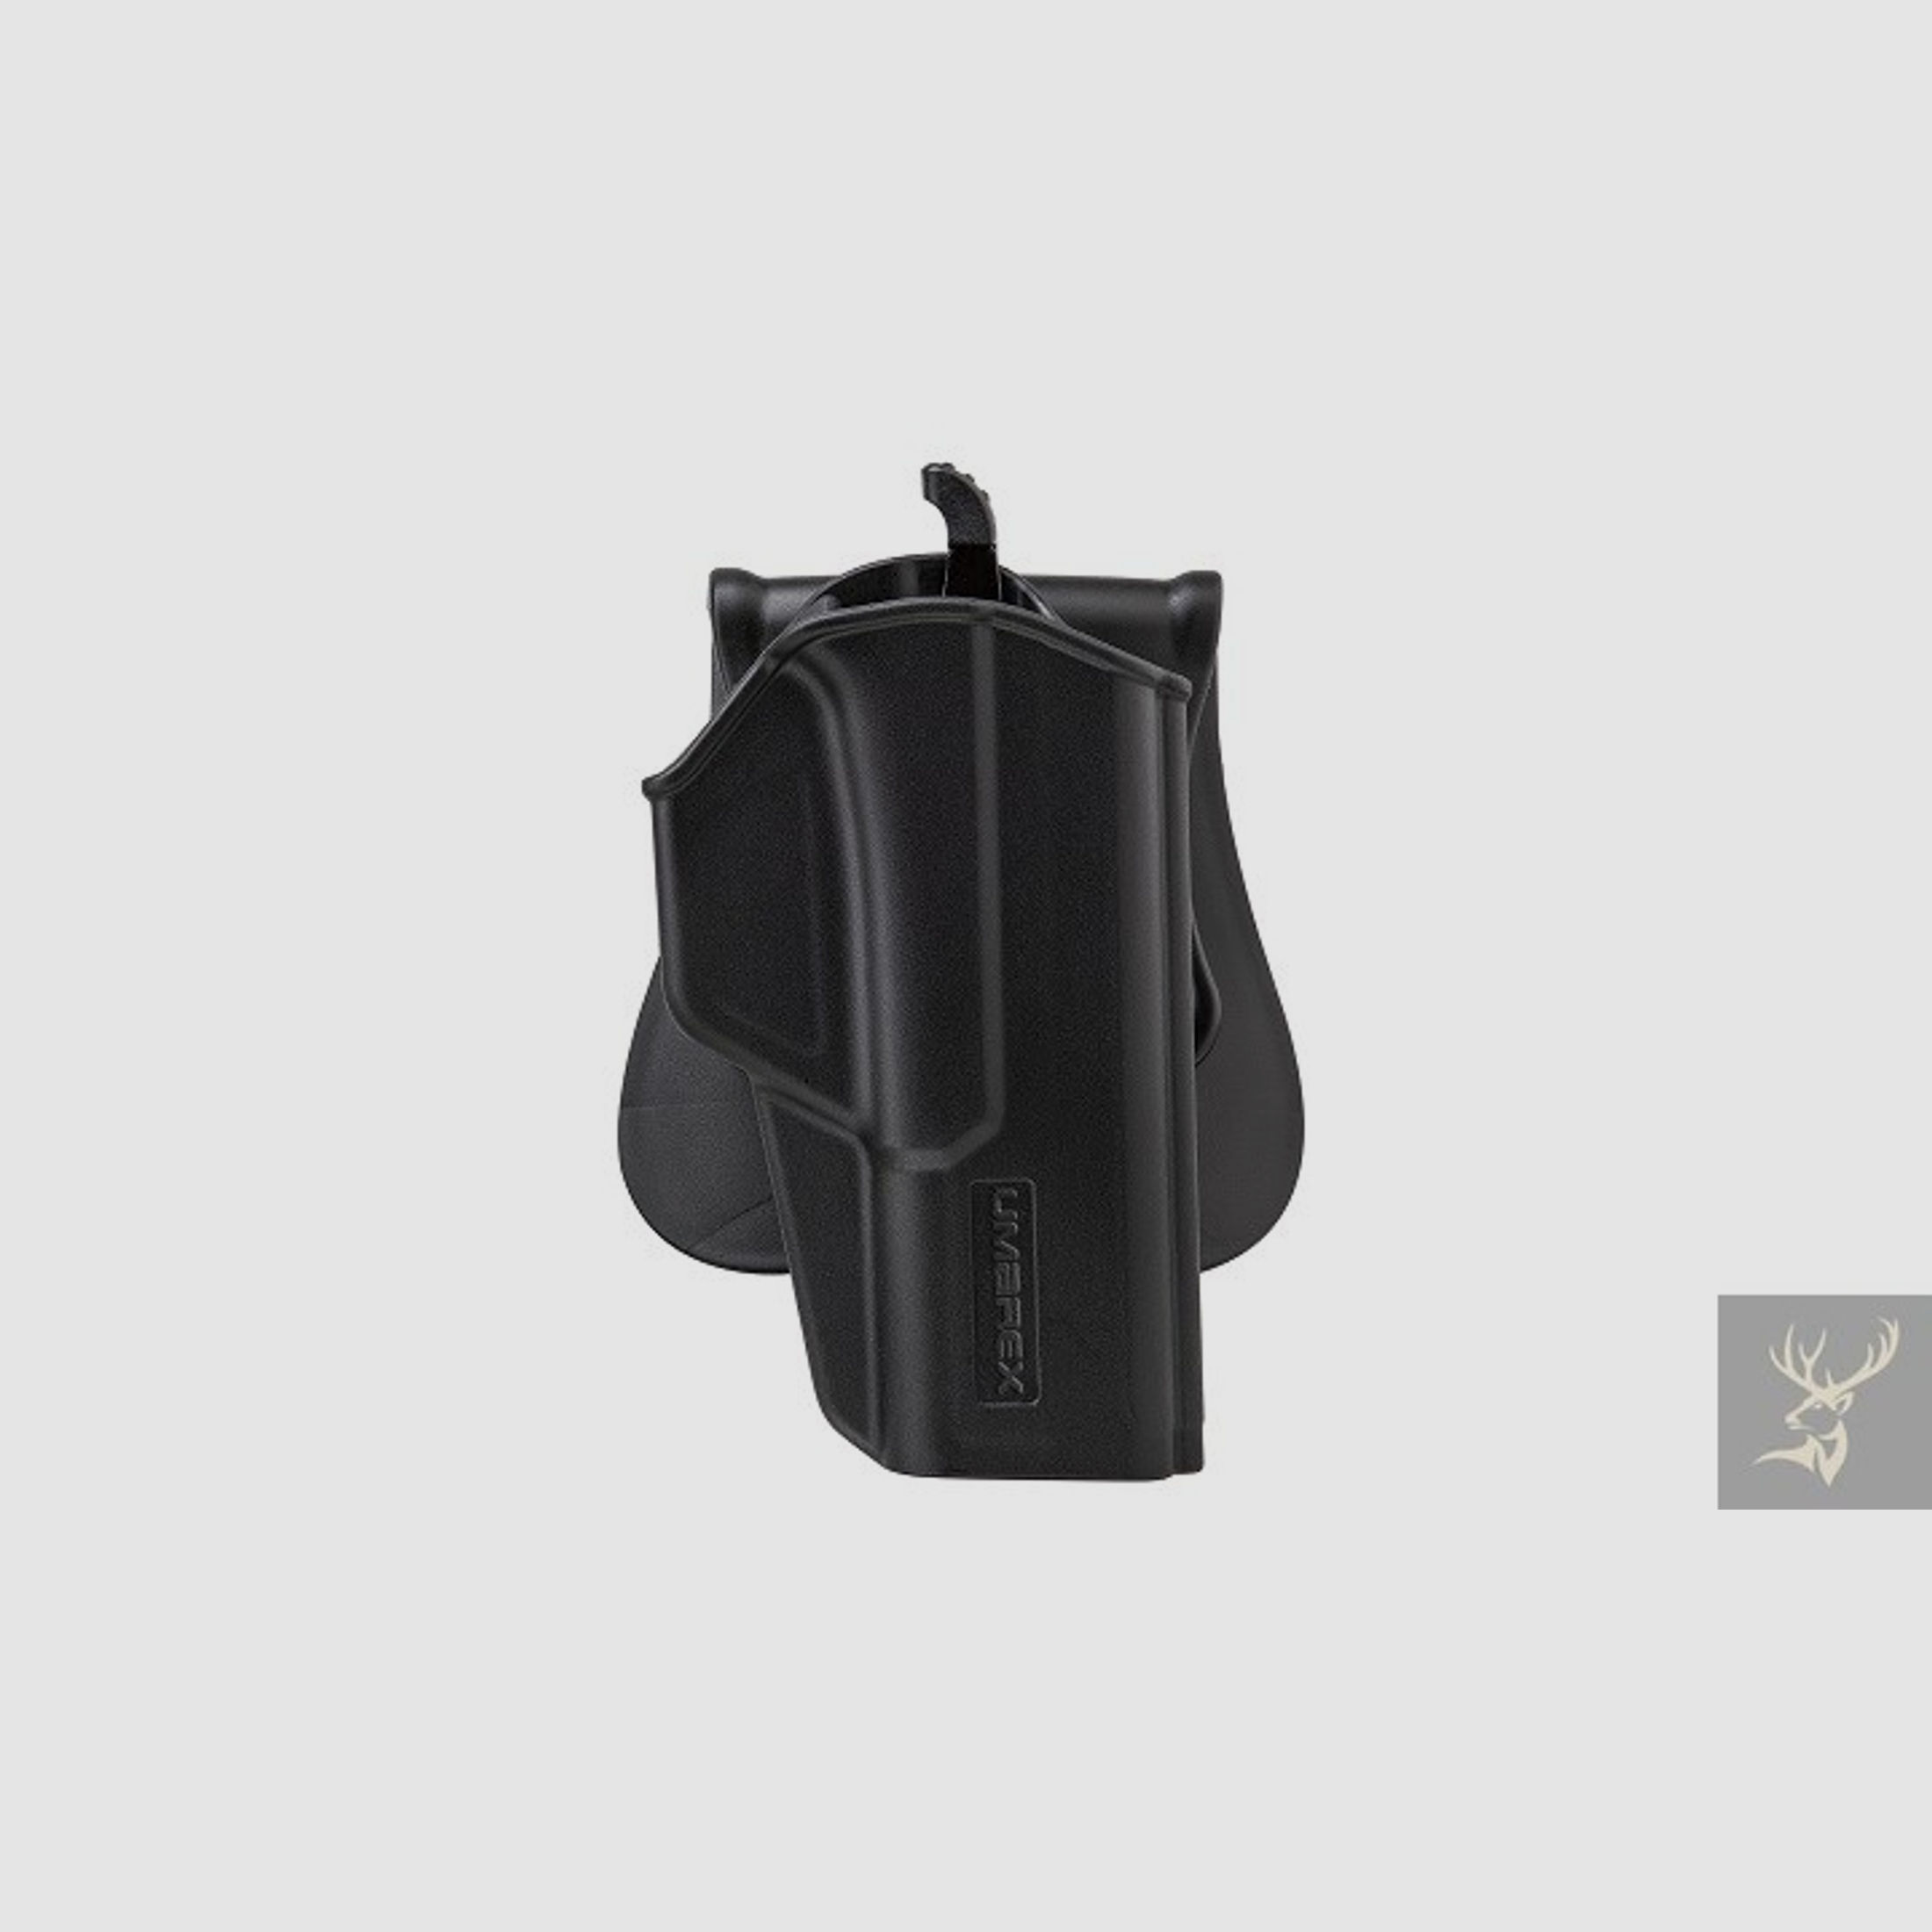 Umarex Paddle Holster f. Glock 17 inkl. Release Button